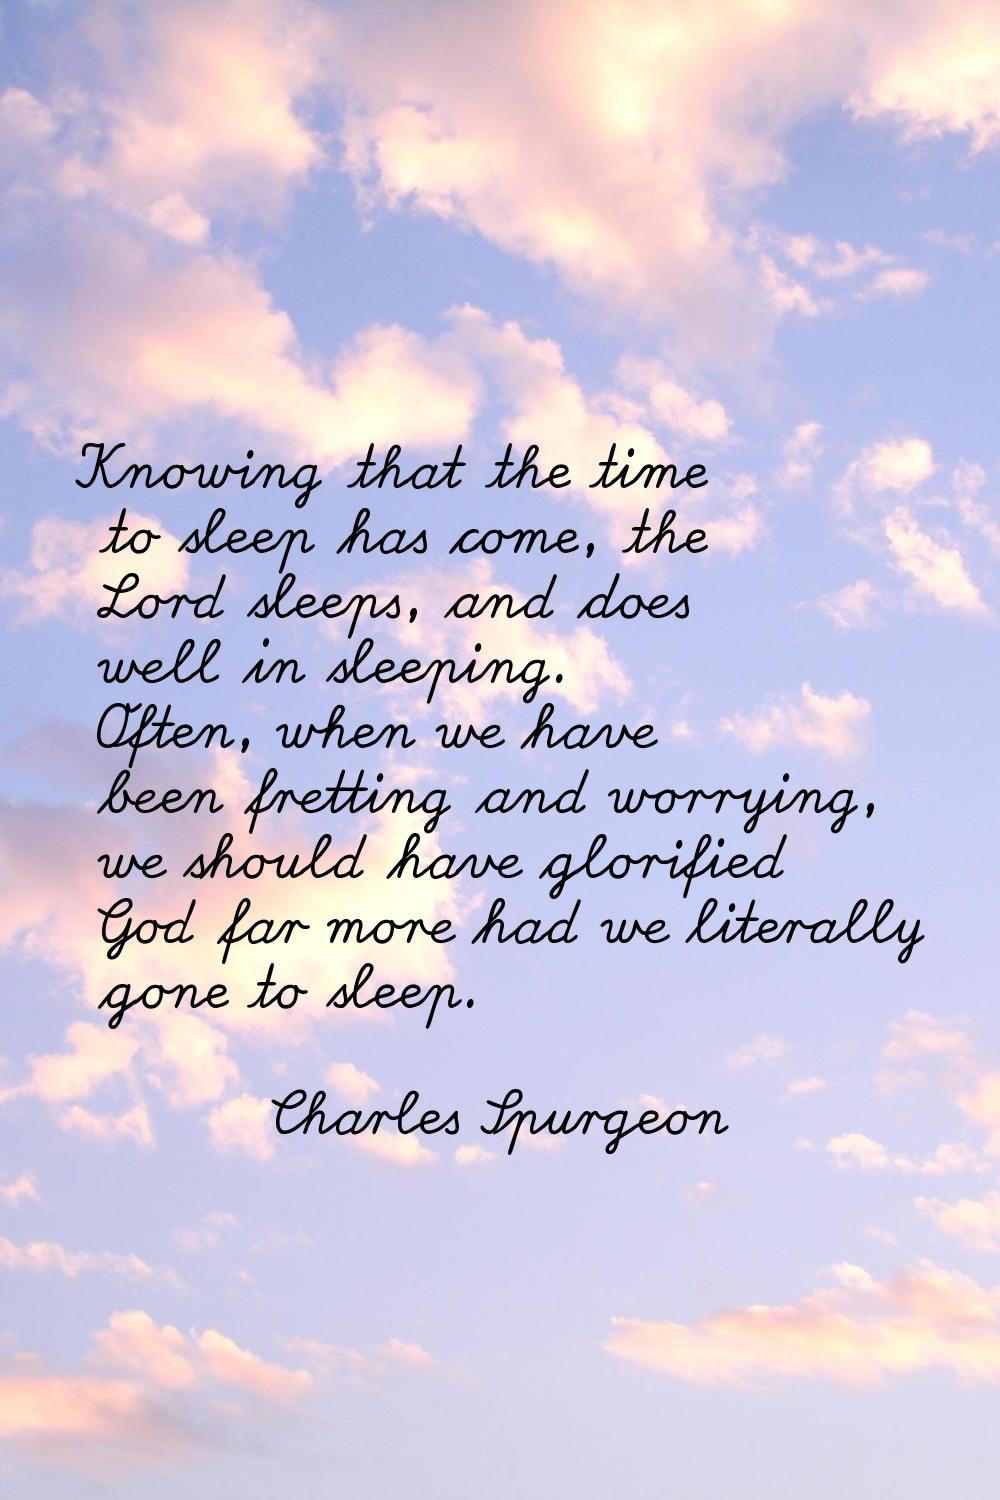 Knowing that the time to sleep has come, the Lord sleeps, and does well in sleeping. Often, when we